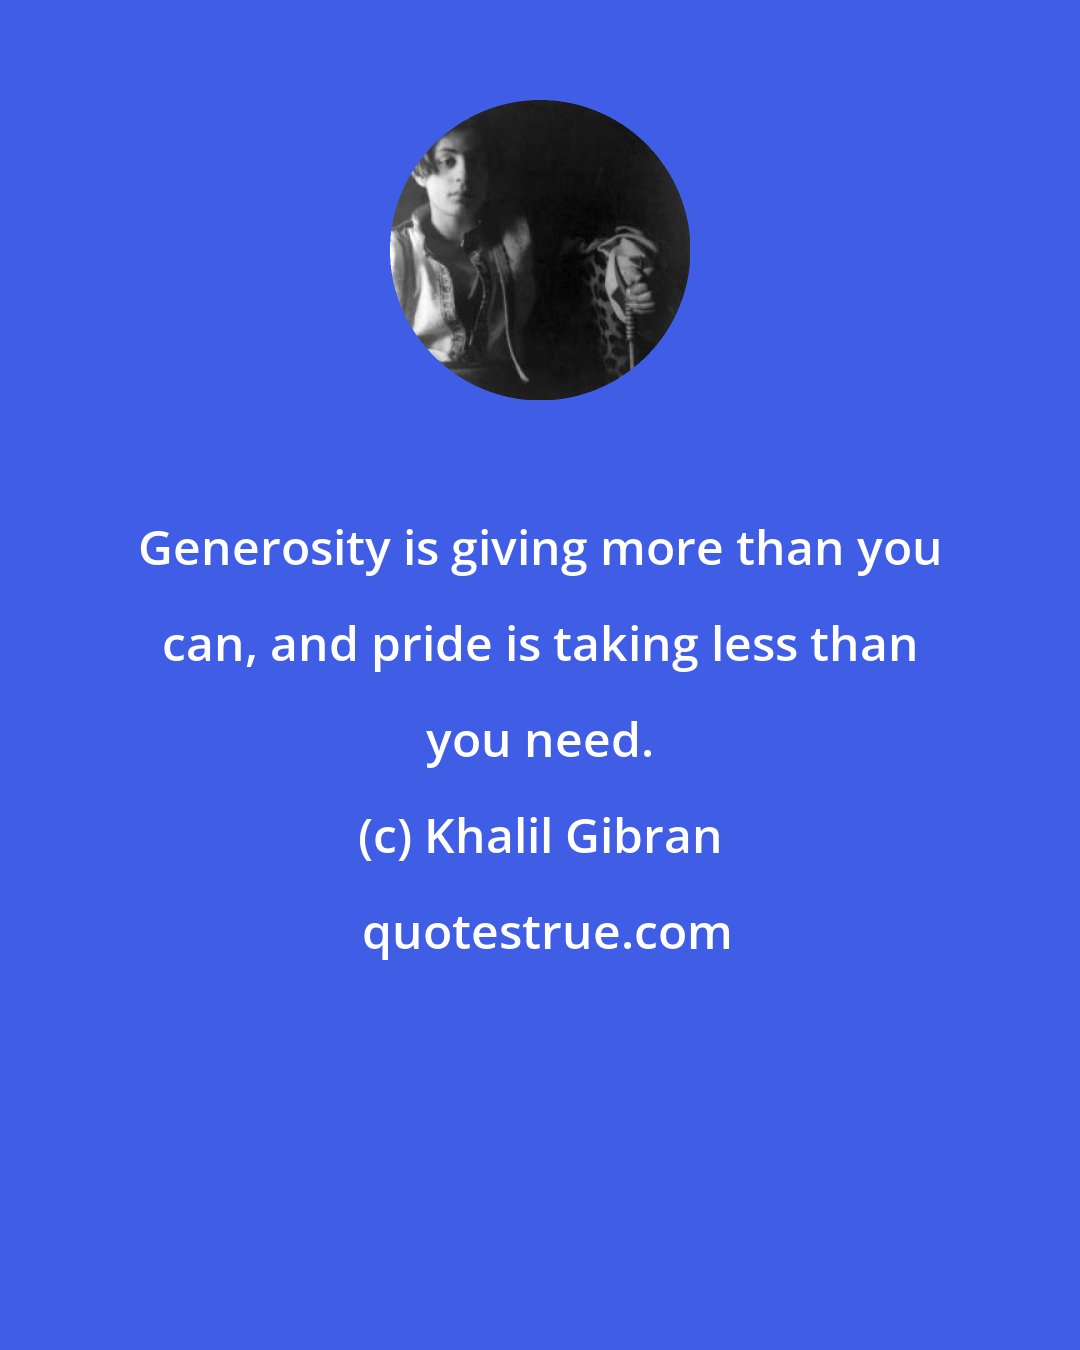 Khalil Gibran: Generosity is giving more than you can, and pride is taking less than you need.